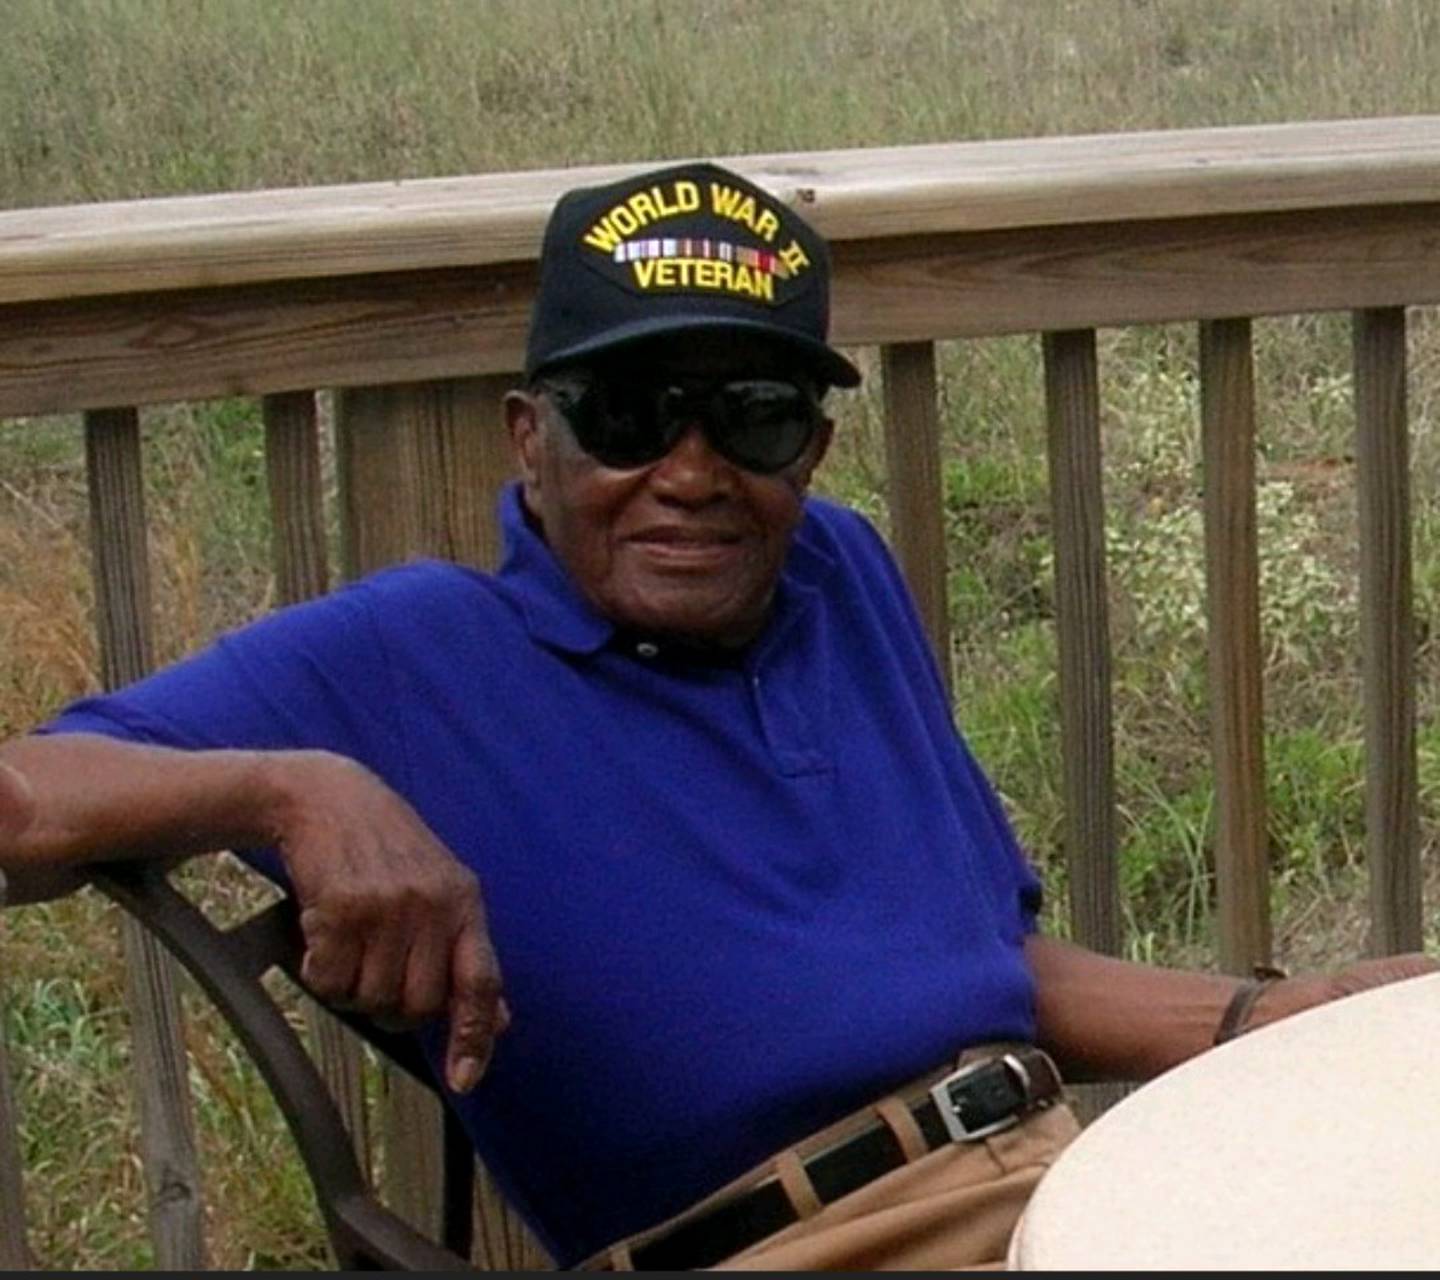 Ezra Hill Sr., a Baltimore native, died at the age of 111 on Oct. 4. He was believed to be the oldest living World War II veteran at the time of his death.